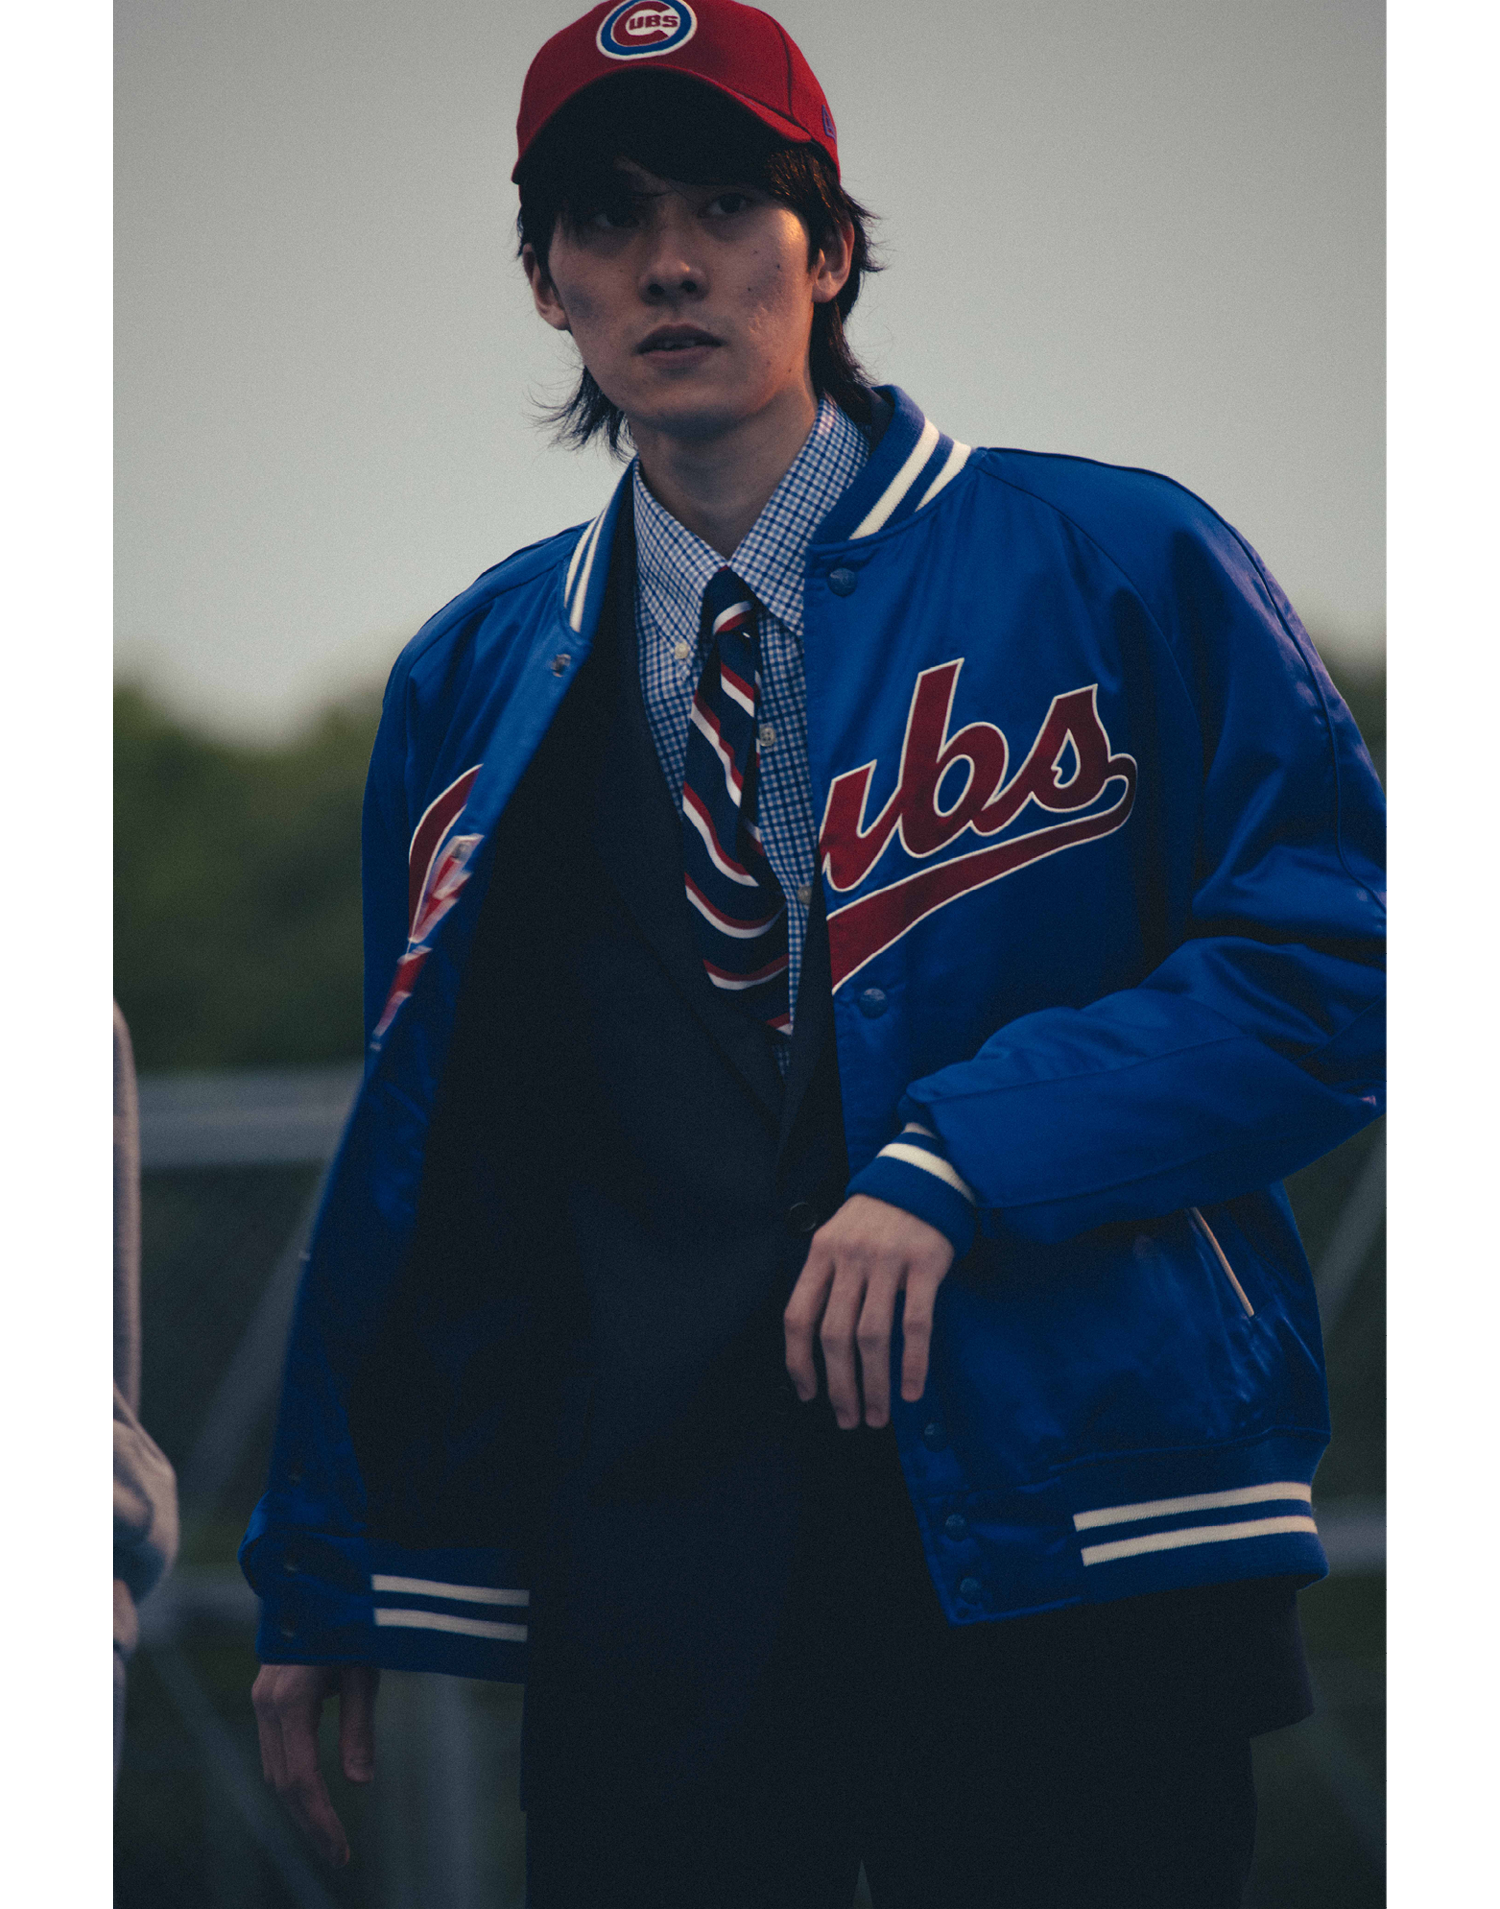 POLO RALPH LAUREN × MLB CAPSULE COLLECTION | SWAG HOMMES